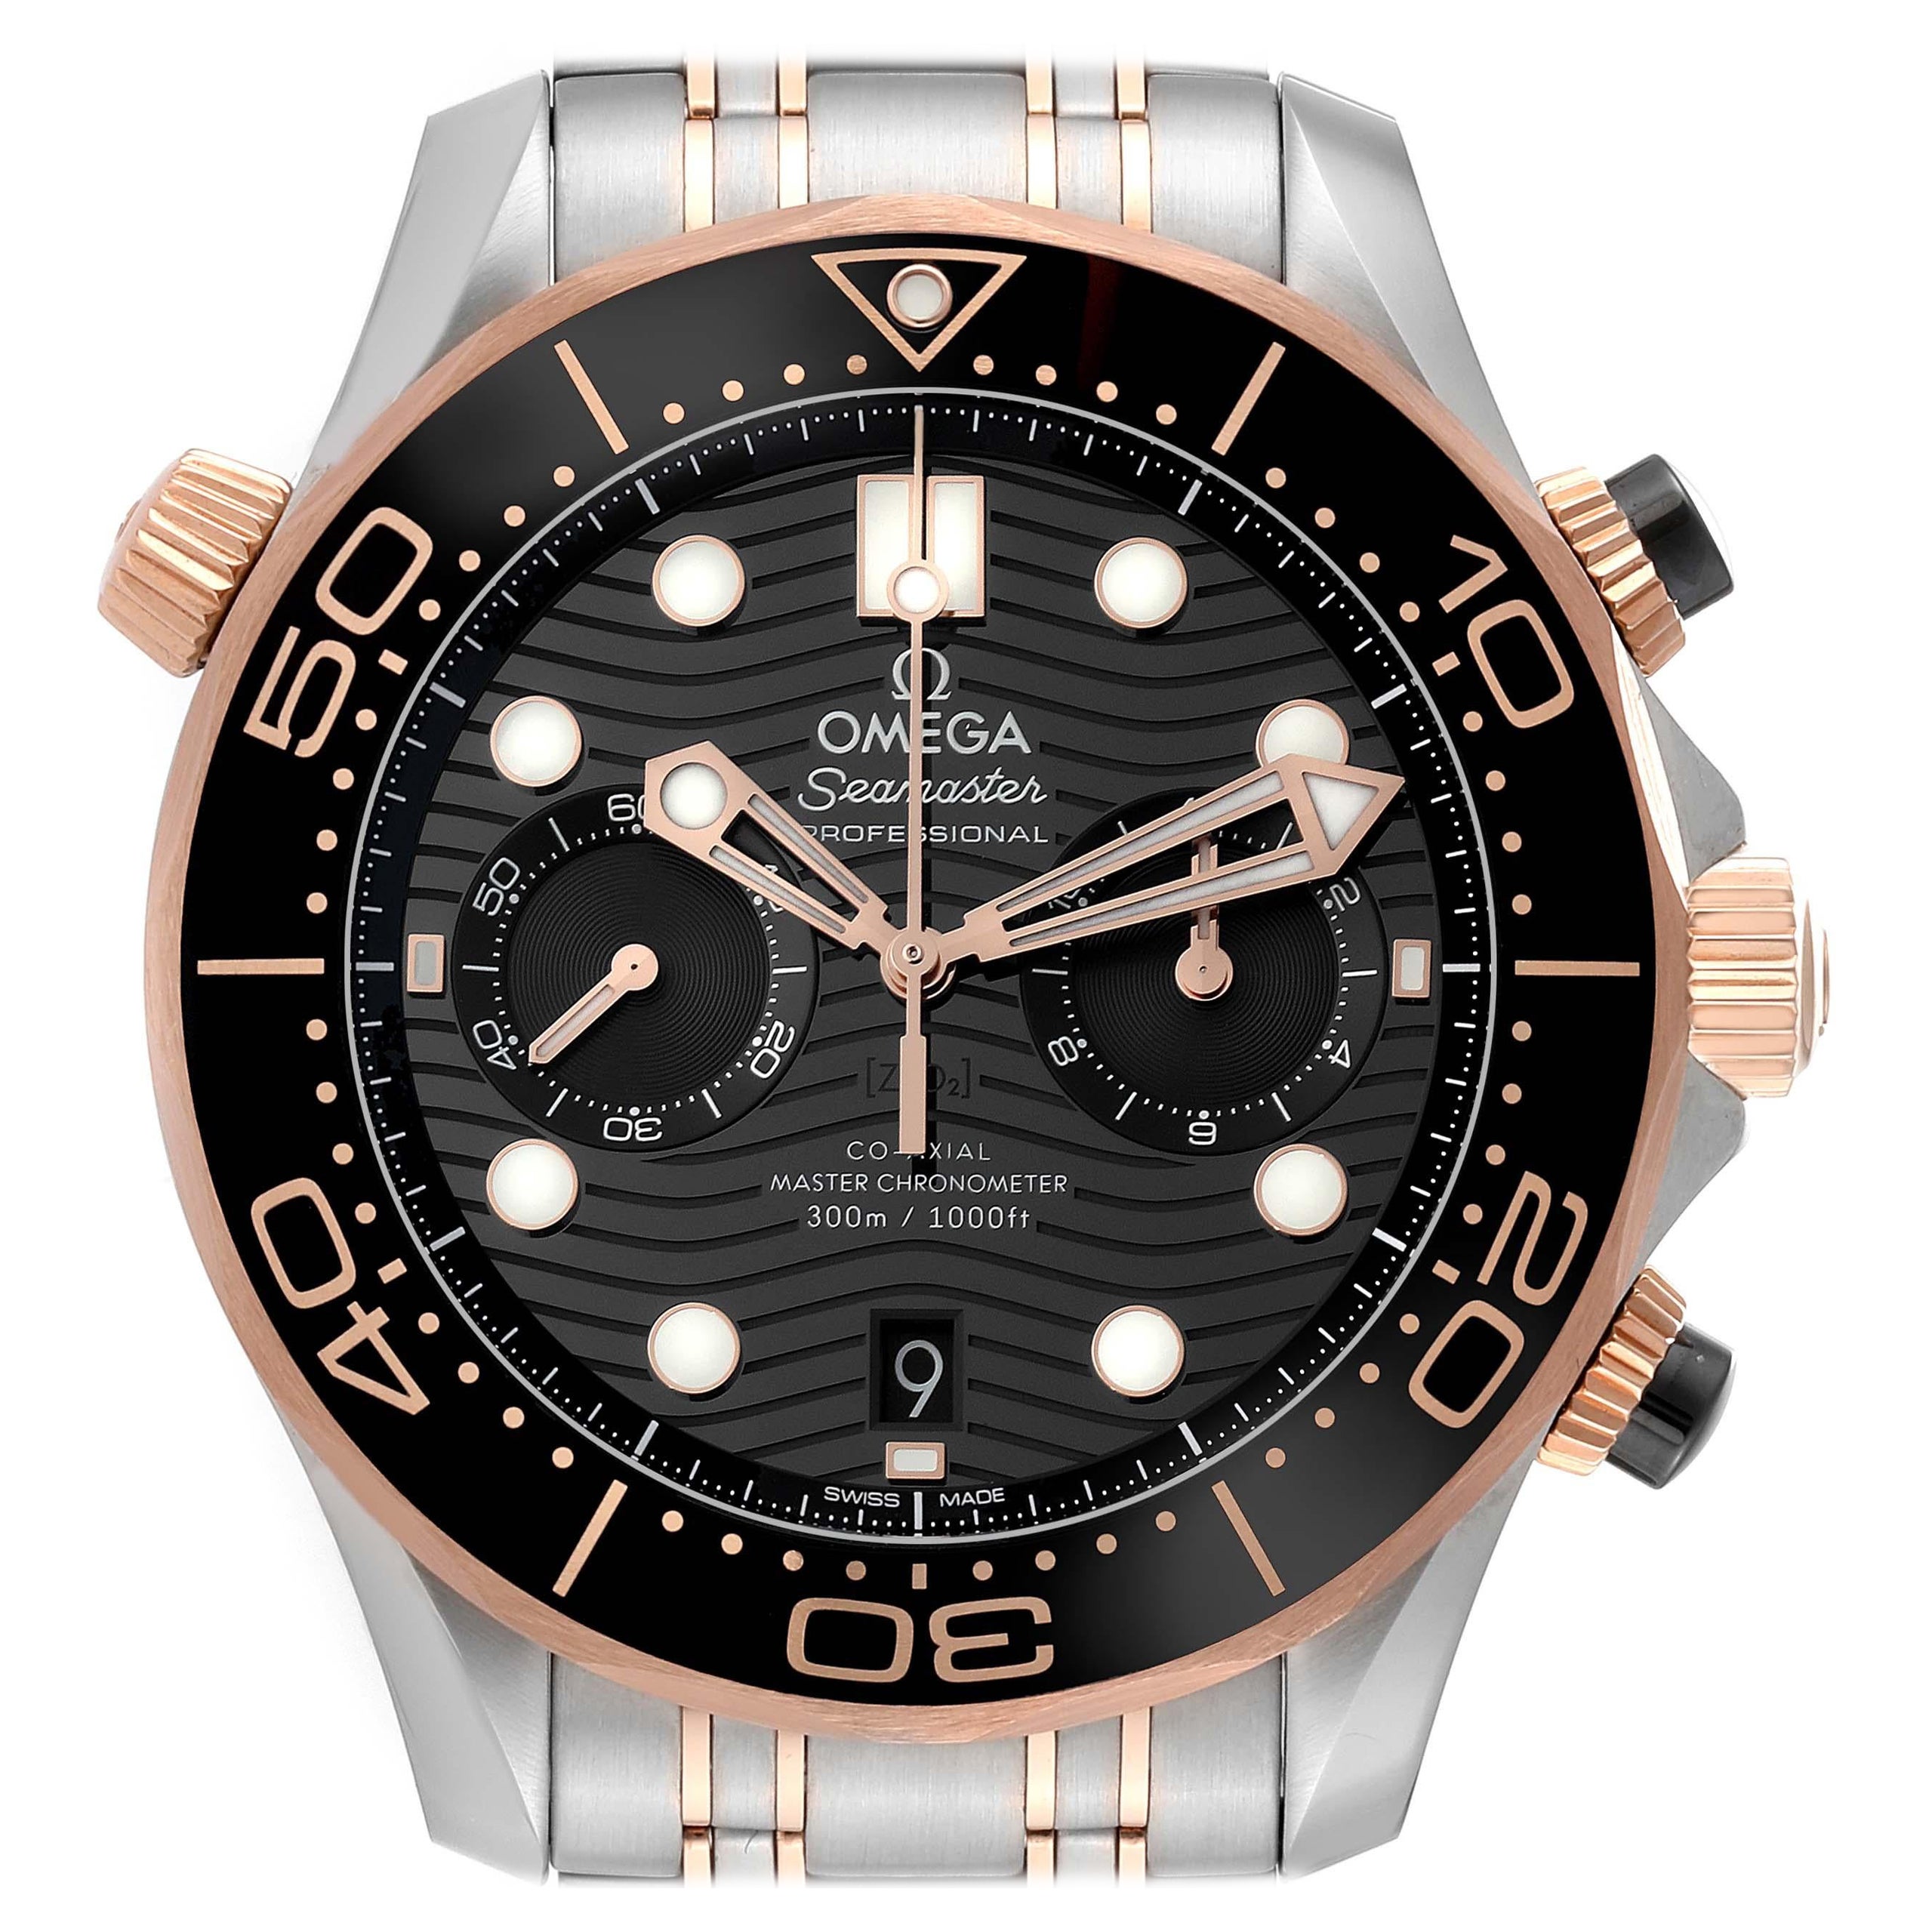 Omega Seamaster Diver Steel Rose Gold Mens Watch 210.20.44.51.01.001 Box Card For Sale